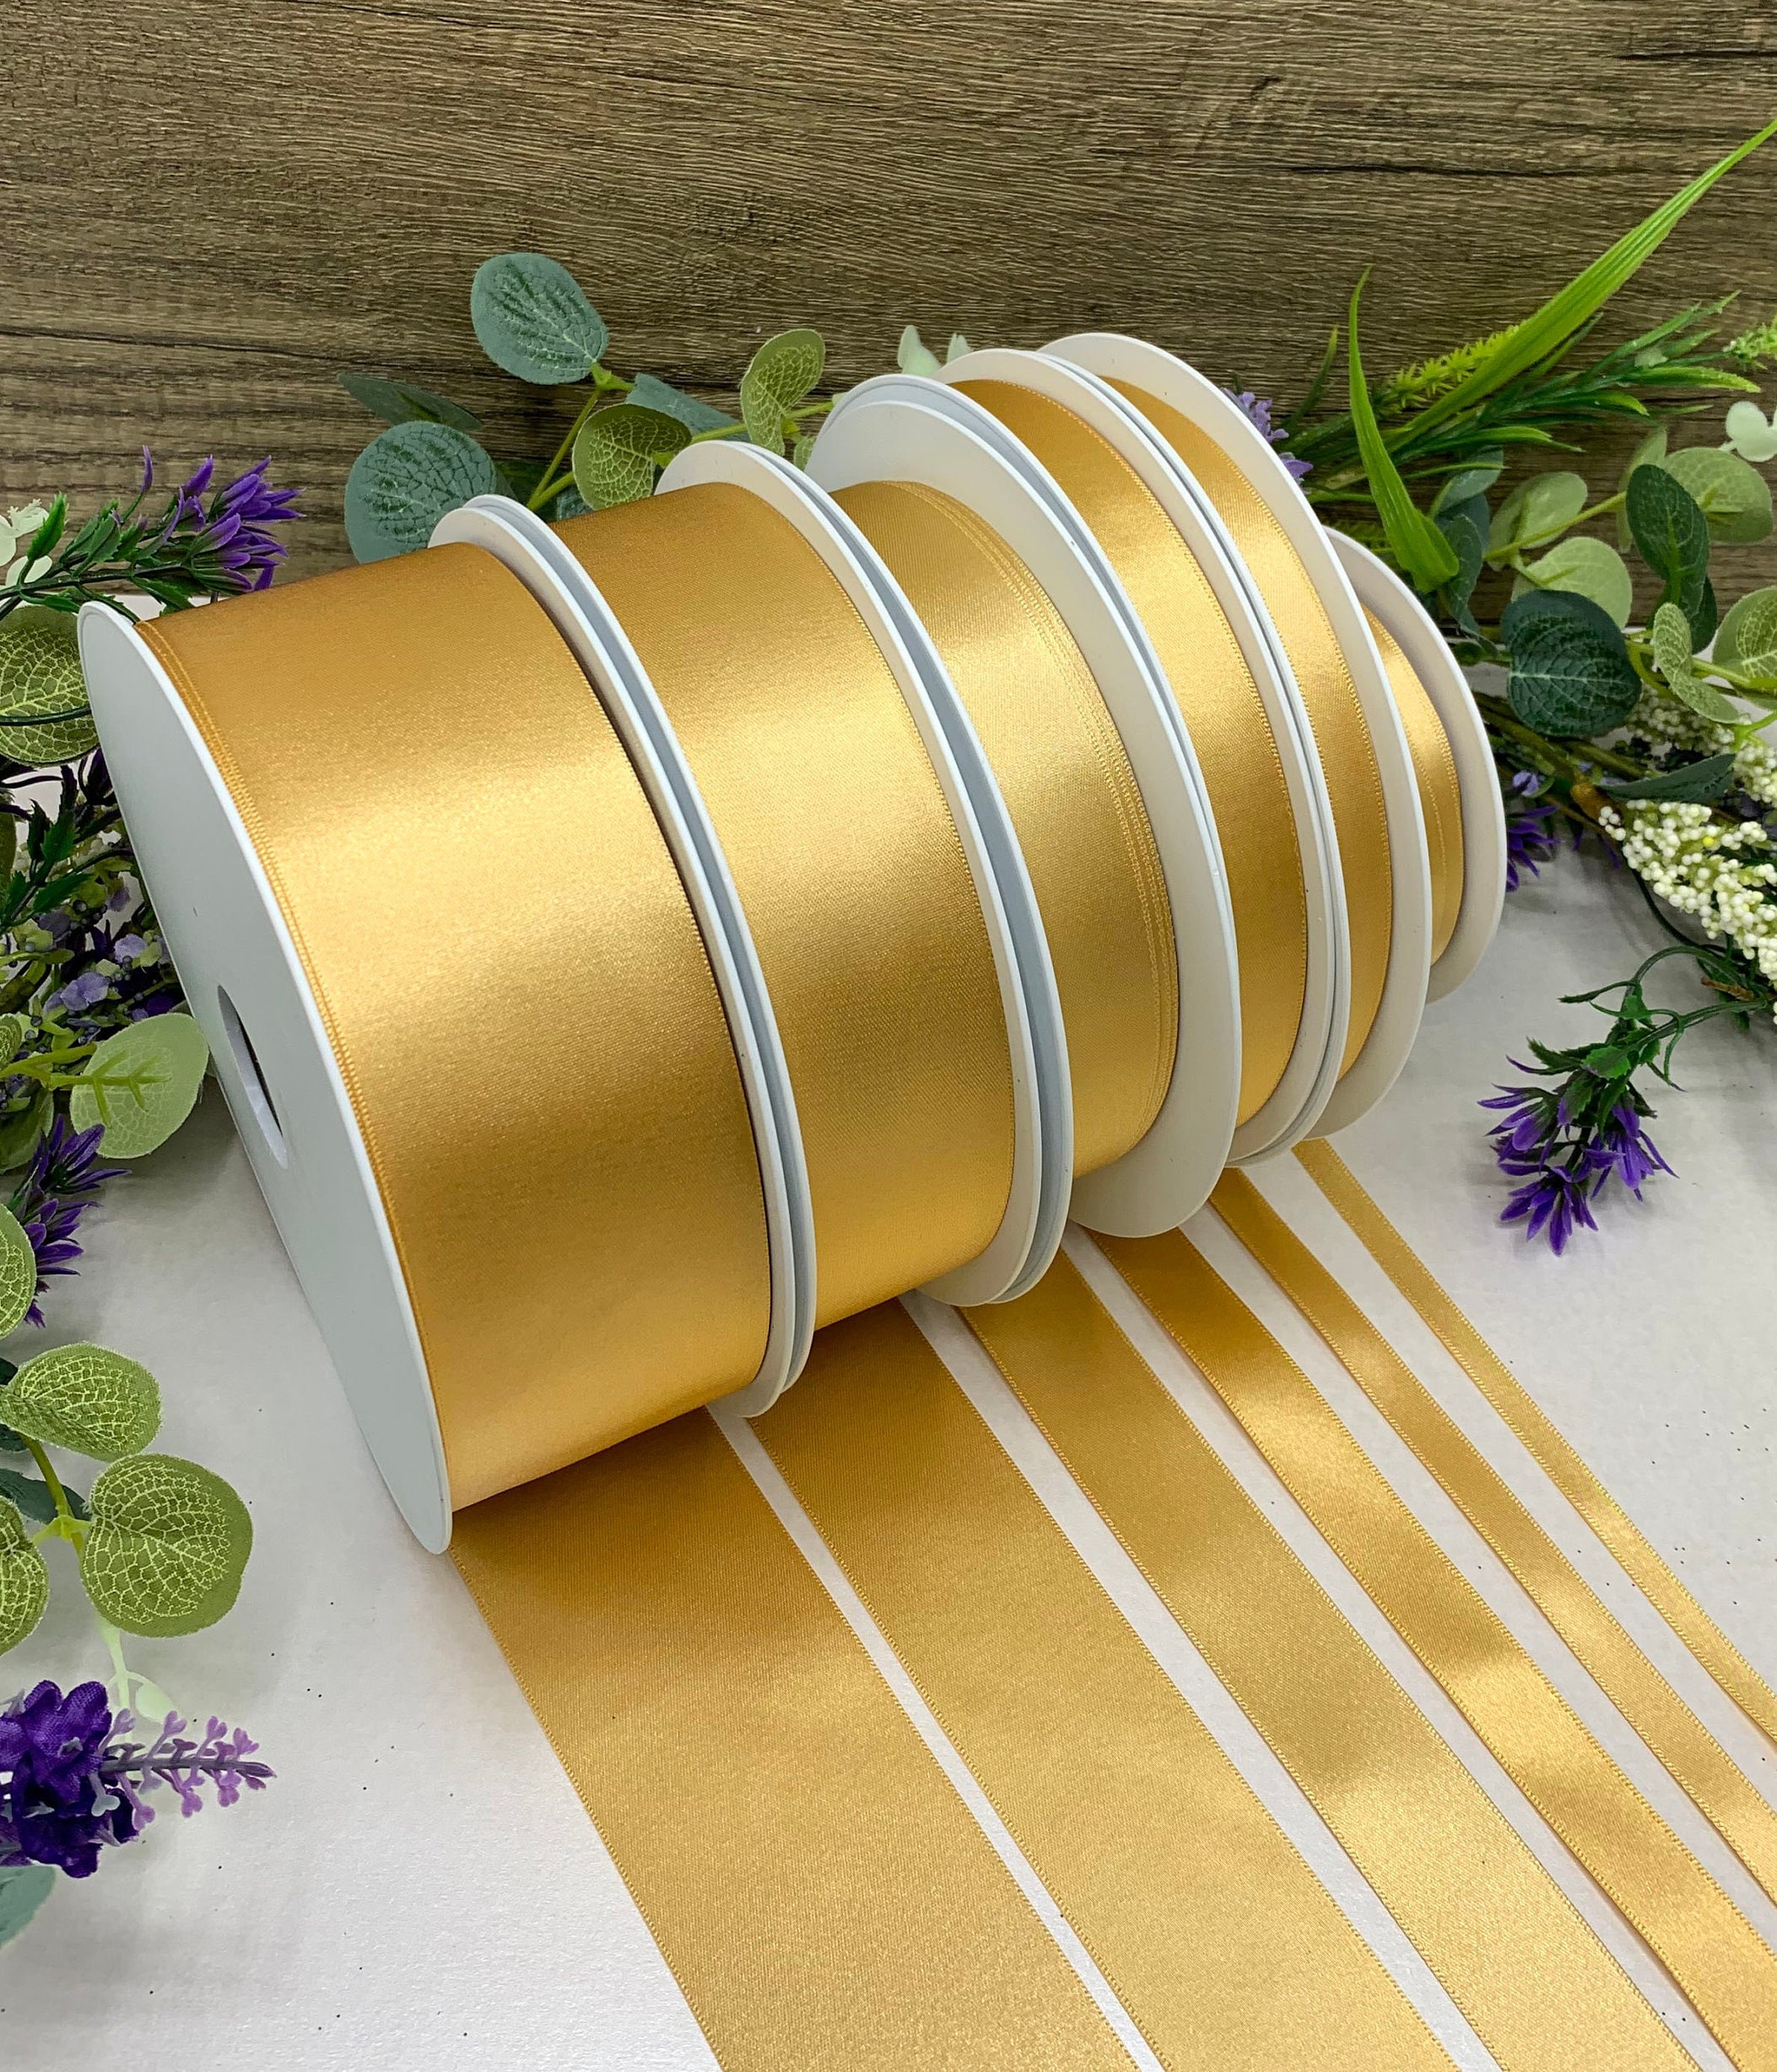 Solid Color Gold Satin Ribbon, 1-1/2 Inches x 25 Yards Fabric Satin Ribbon for Gift Wrapping, Crafts, Hair Bows Making, Wreath, Wedding Party